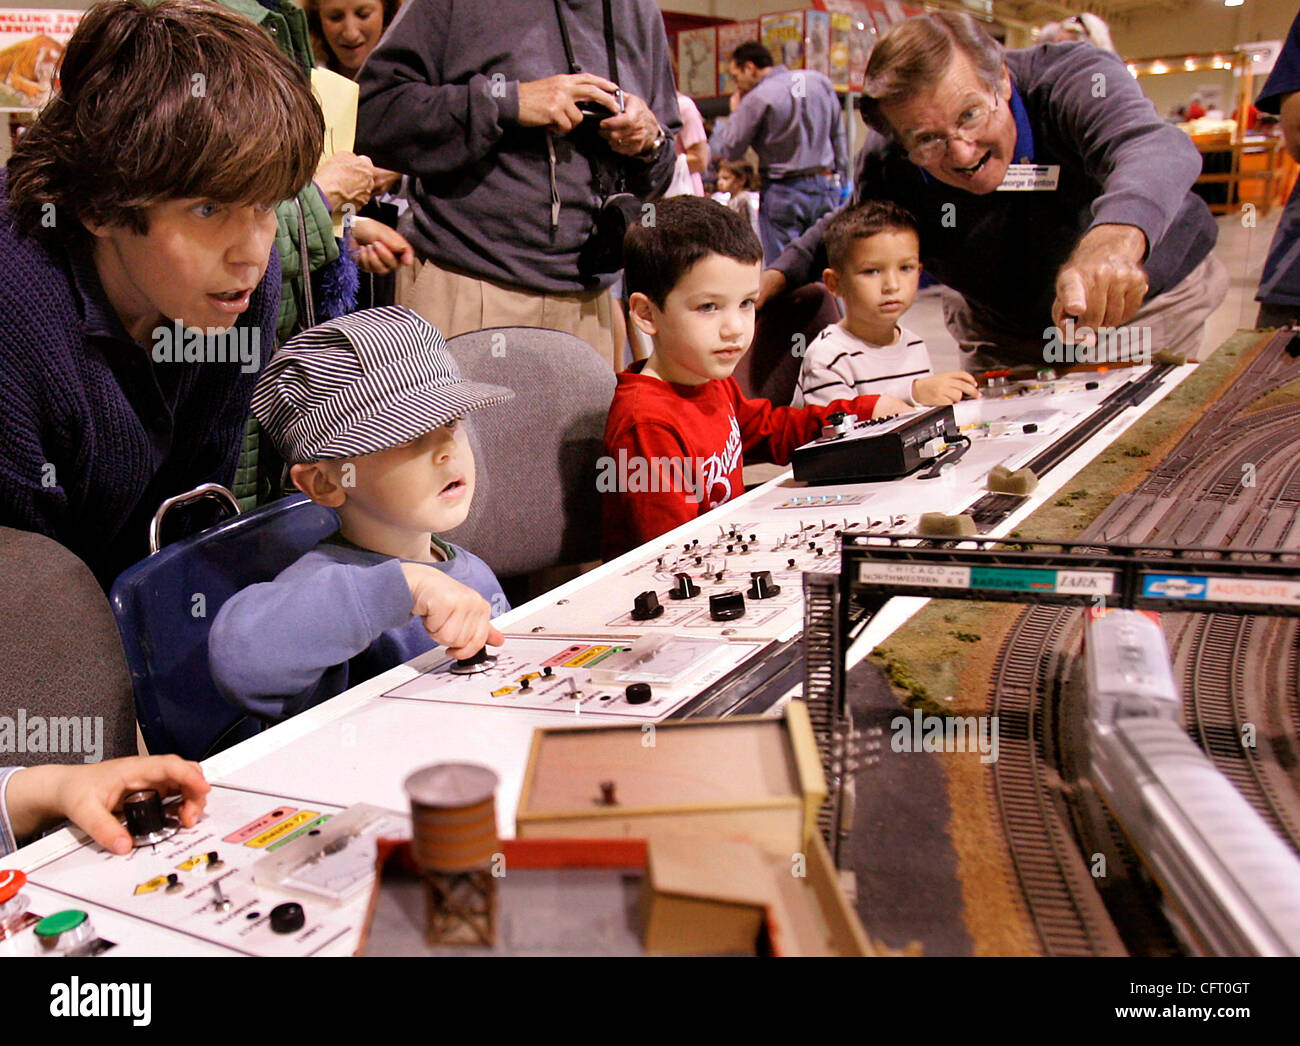 Saturday, December 2, 2006, Del Mar, California, USA Children receive little tips from George Benton, right, on how to handle the HO-Gage trains at the North County Model Railroad Society booth inside the Great Train Expo at the Del Mar Fairgrounds.  From left are Kevin Salazar, 3, of San Diego; Aar Stock Photo